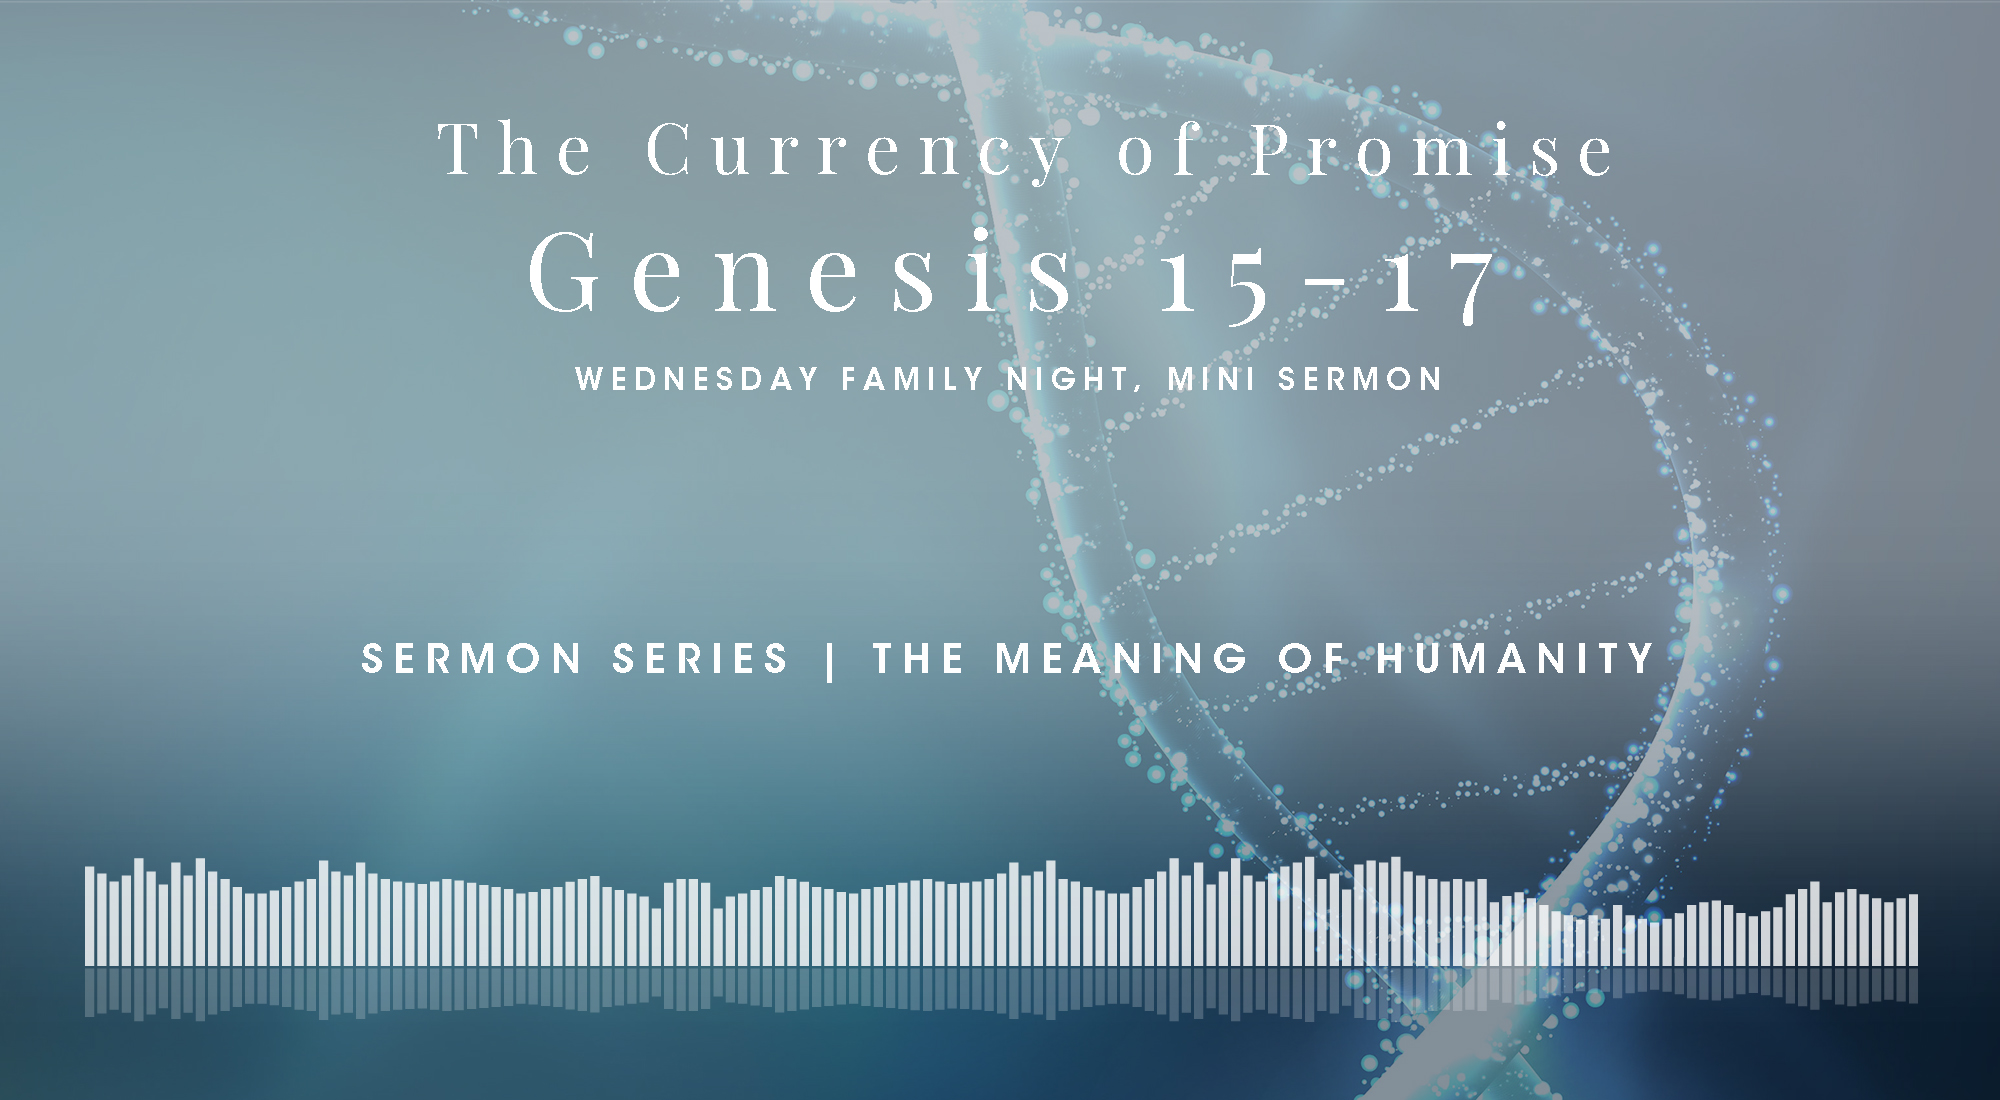 A Mini Bible Study in Genesis 15-17, From The Meaning of Humanity Sermon Series, Wyandotte County Christian Church Wednesday Family Night